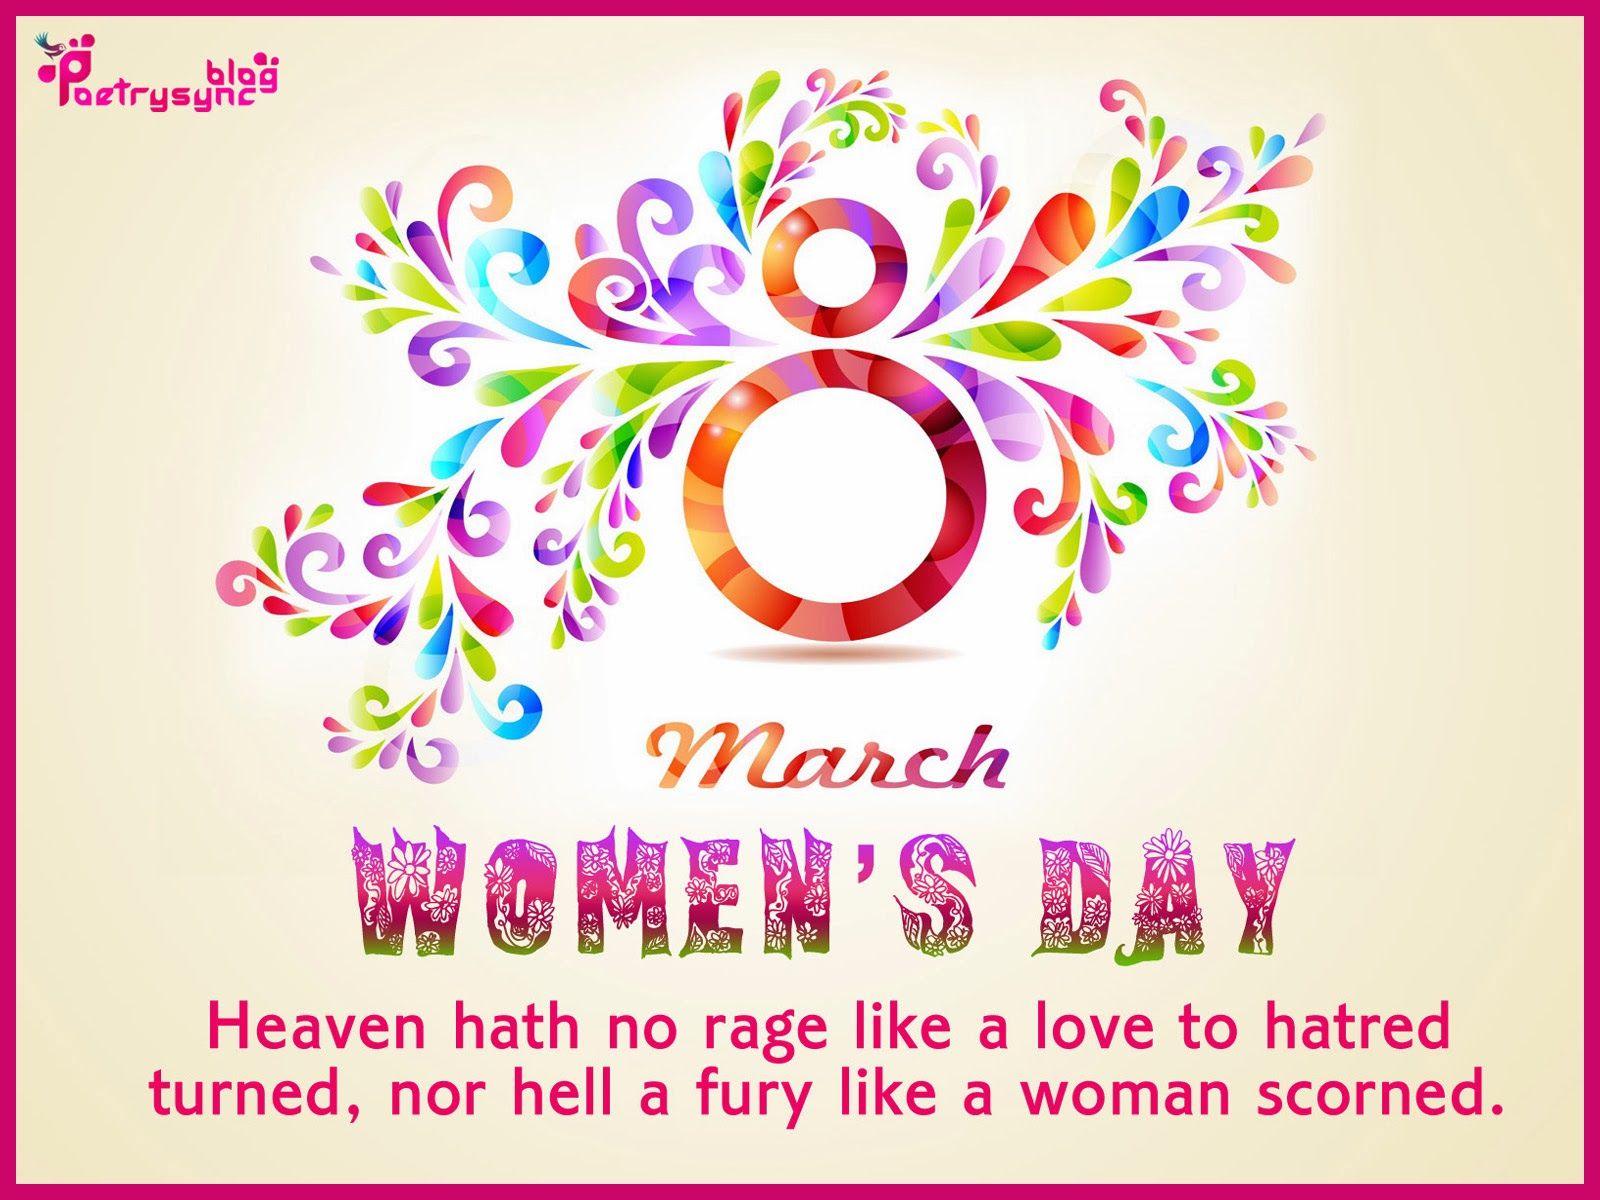 Happy Women's Day Wishes Quote Photo 8 March Image. Womens day quotes